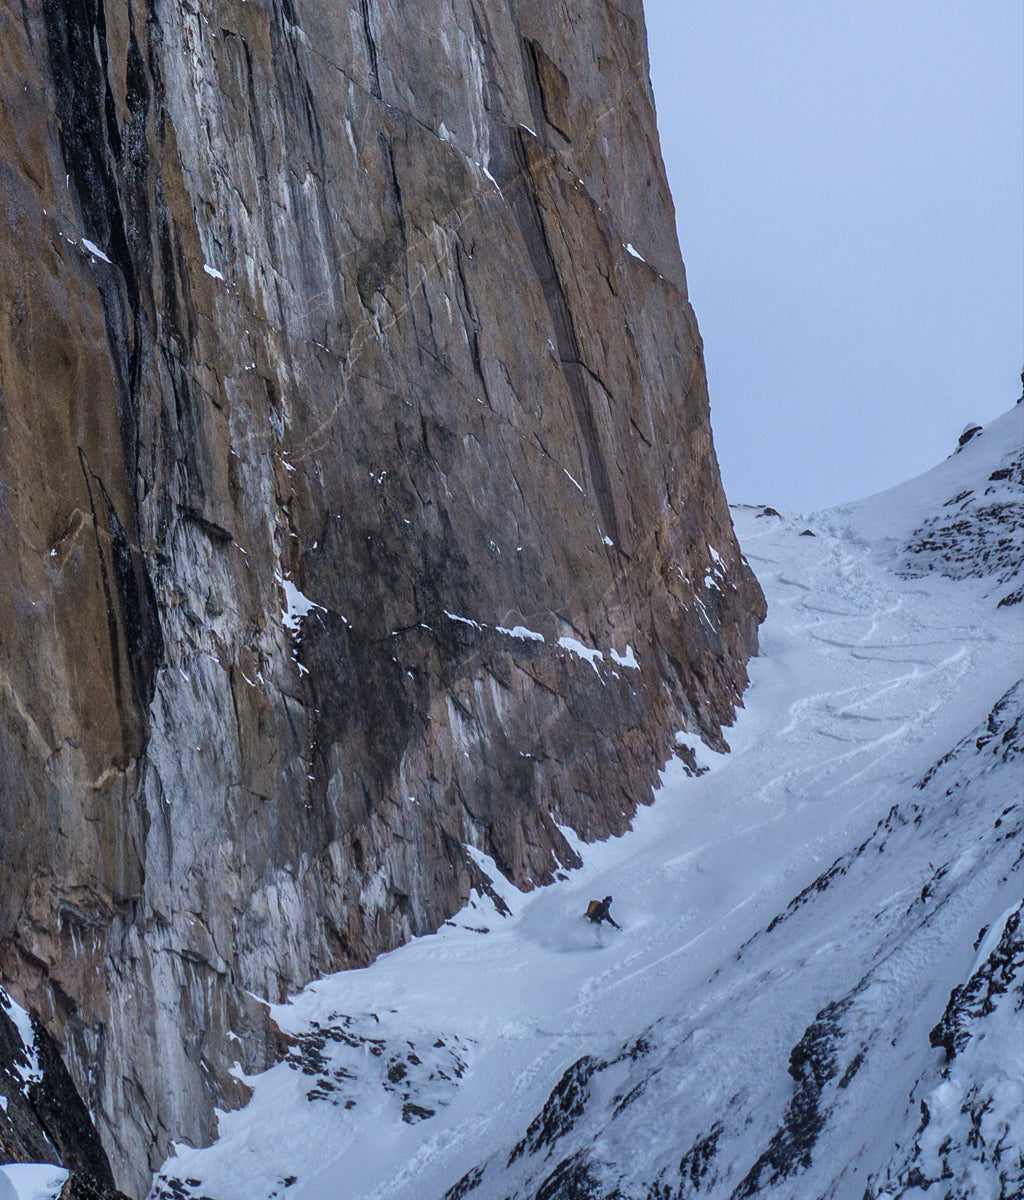 Venture Snowboards Couloir in Tombstone Provincial Park